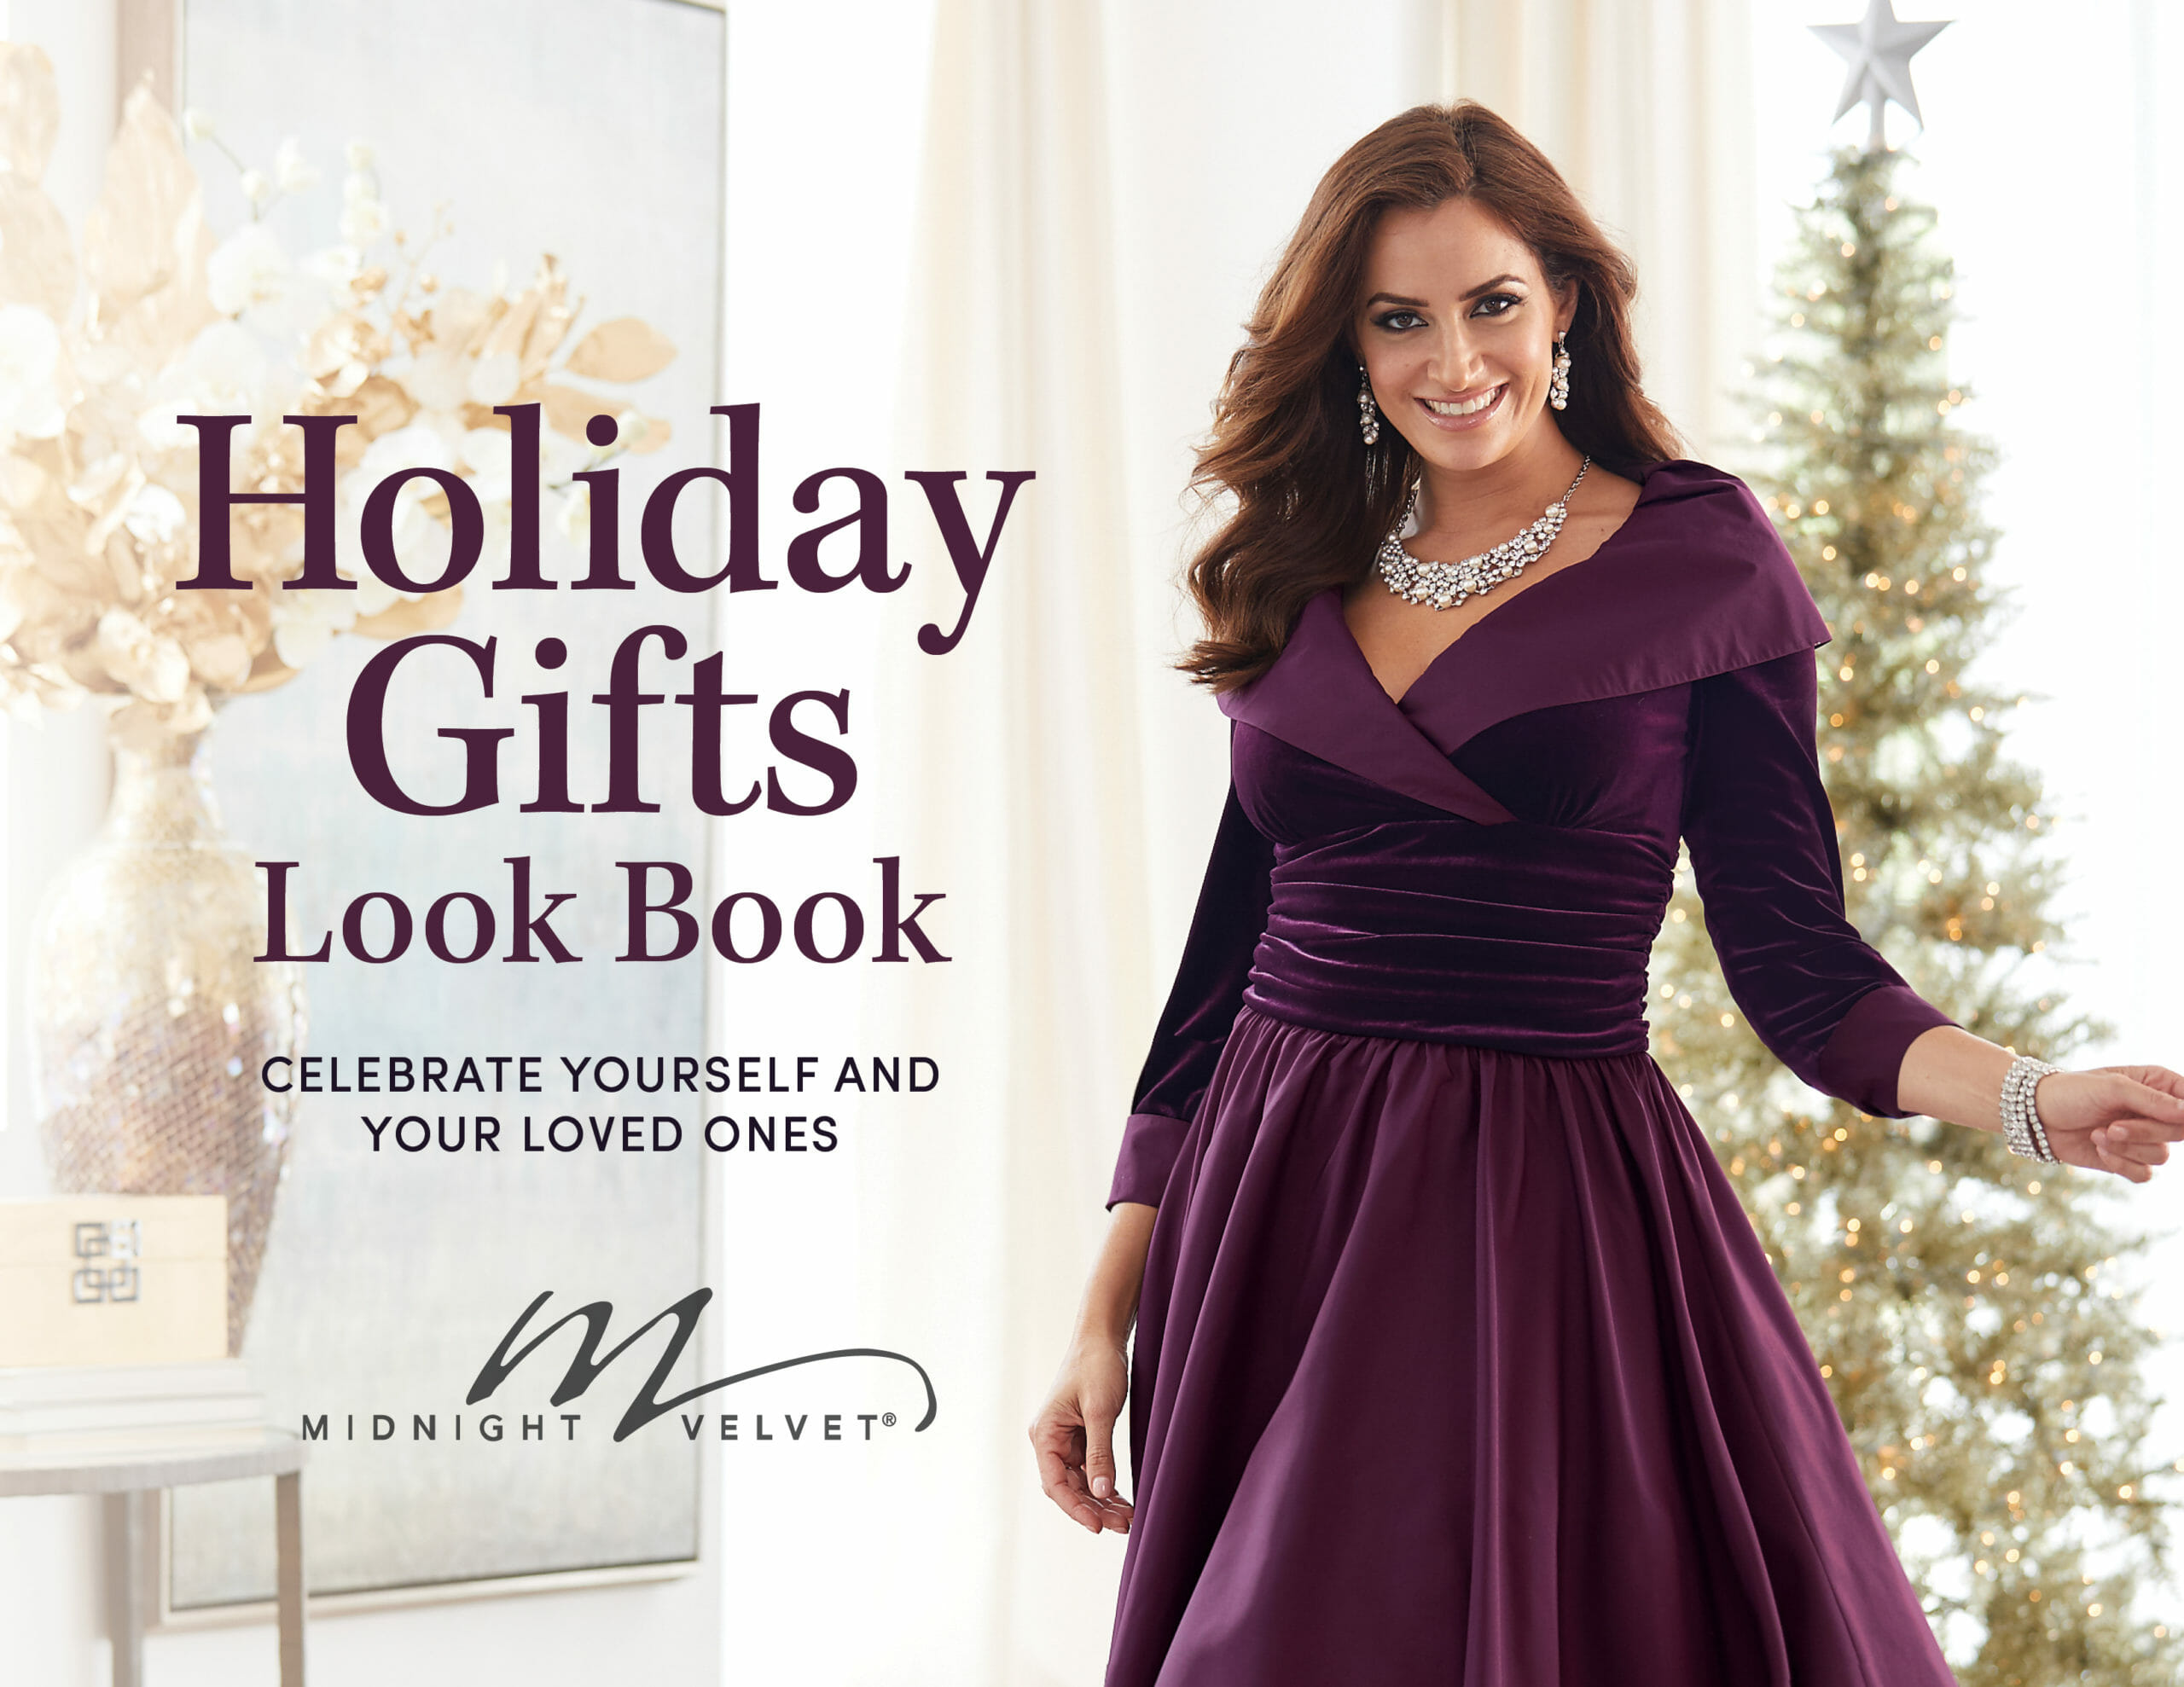 Midnight Velvet Holiday Gifts Look Book, A smiling woman in a formal plum full-skirted dress with a wide collar.